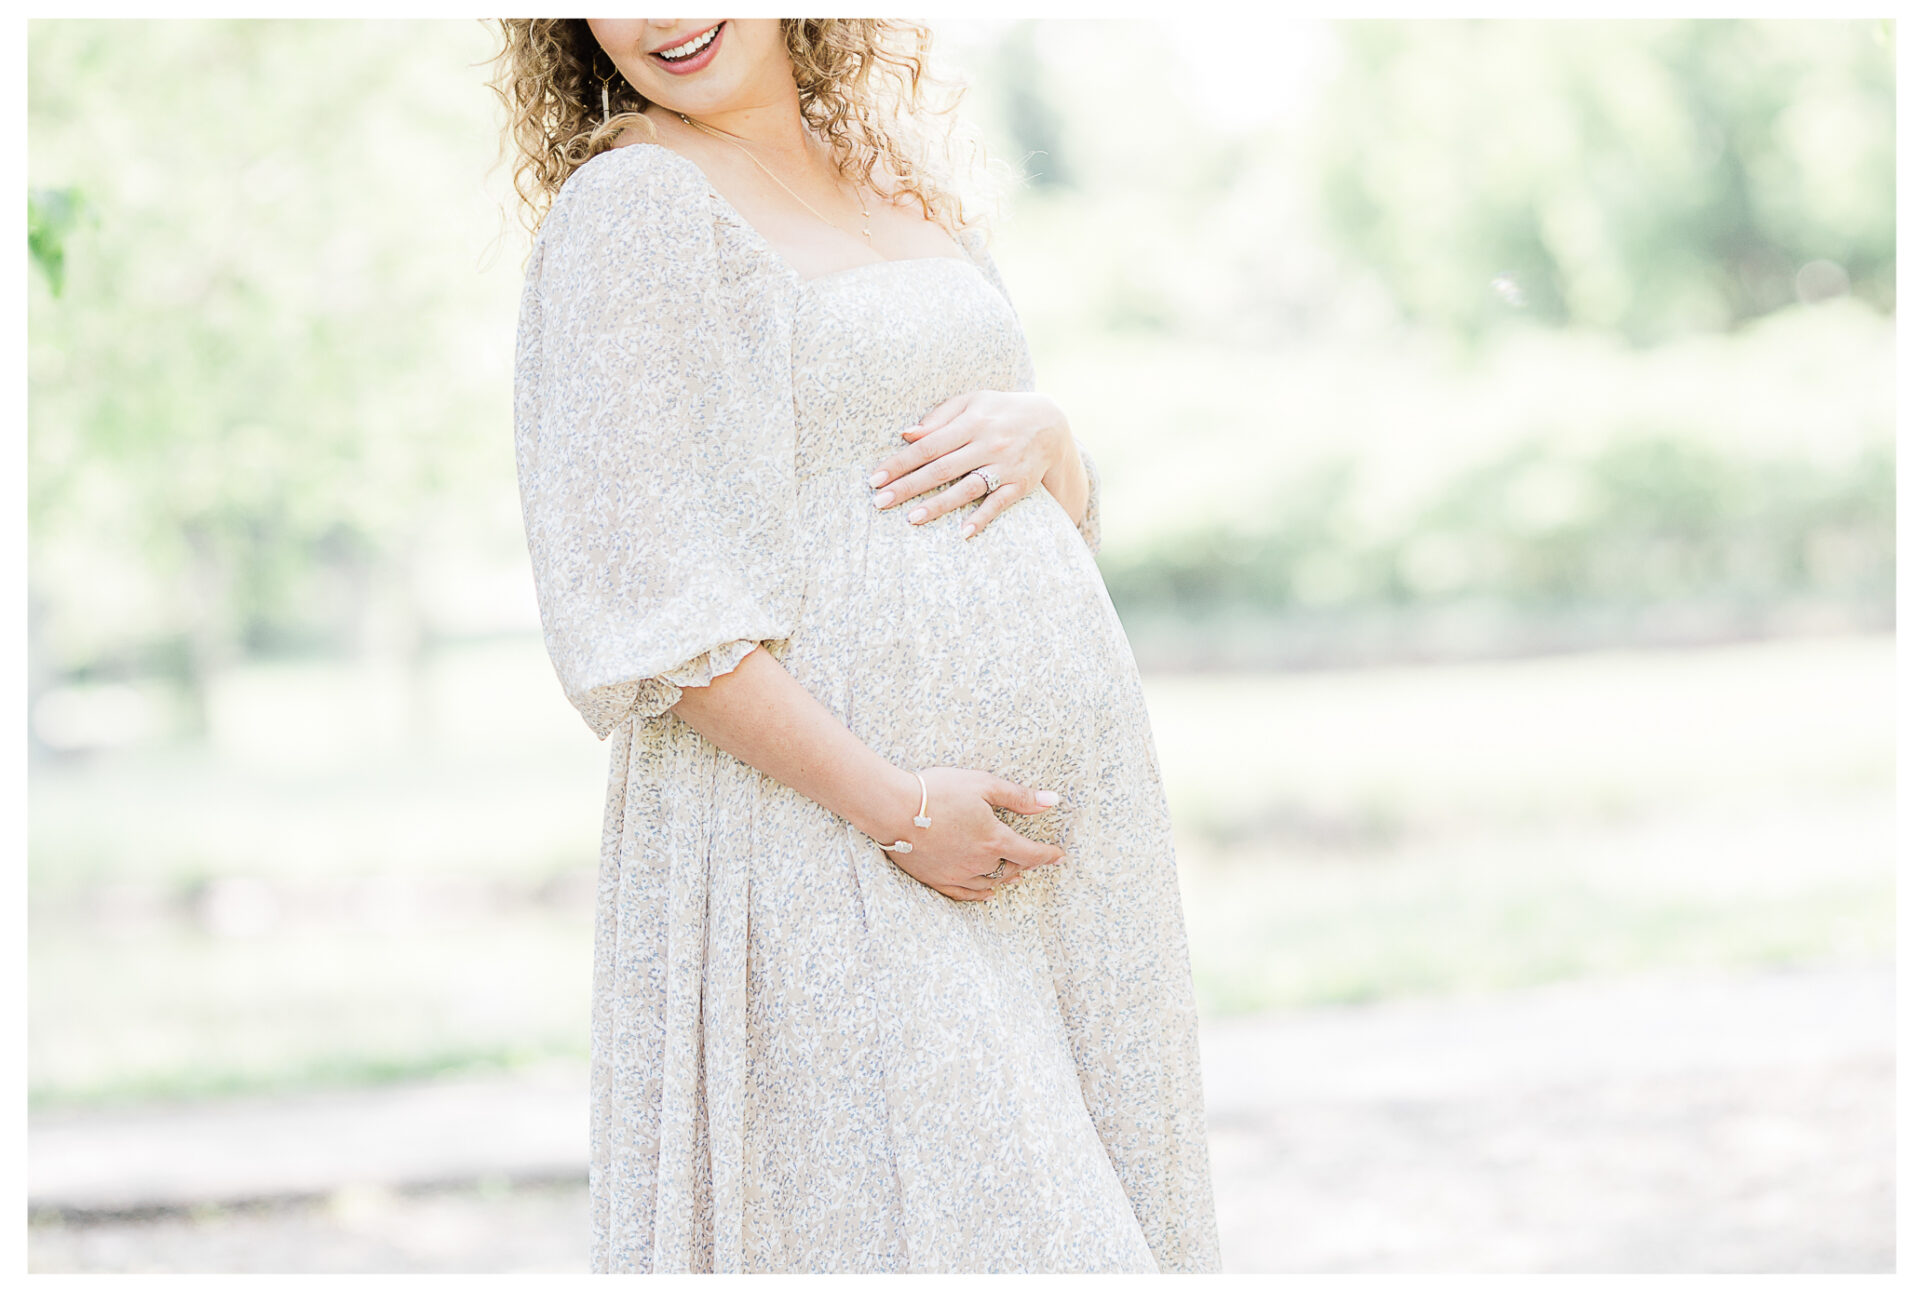 Winter Freire Photography | maternity session outdoors | woman smiling holding her baby bump